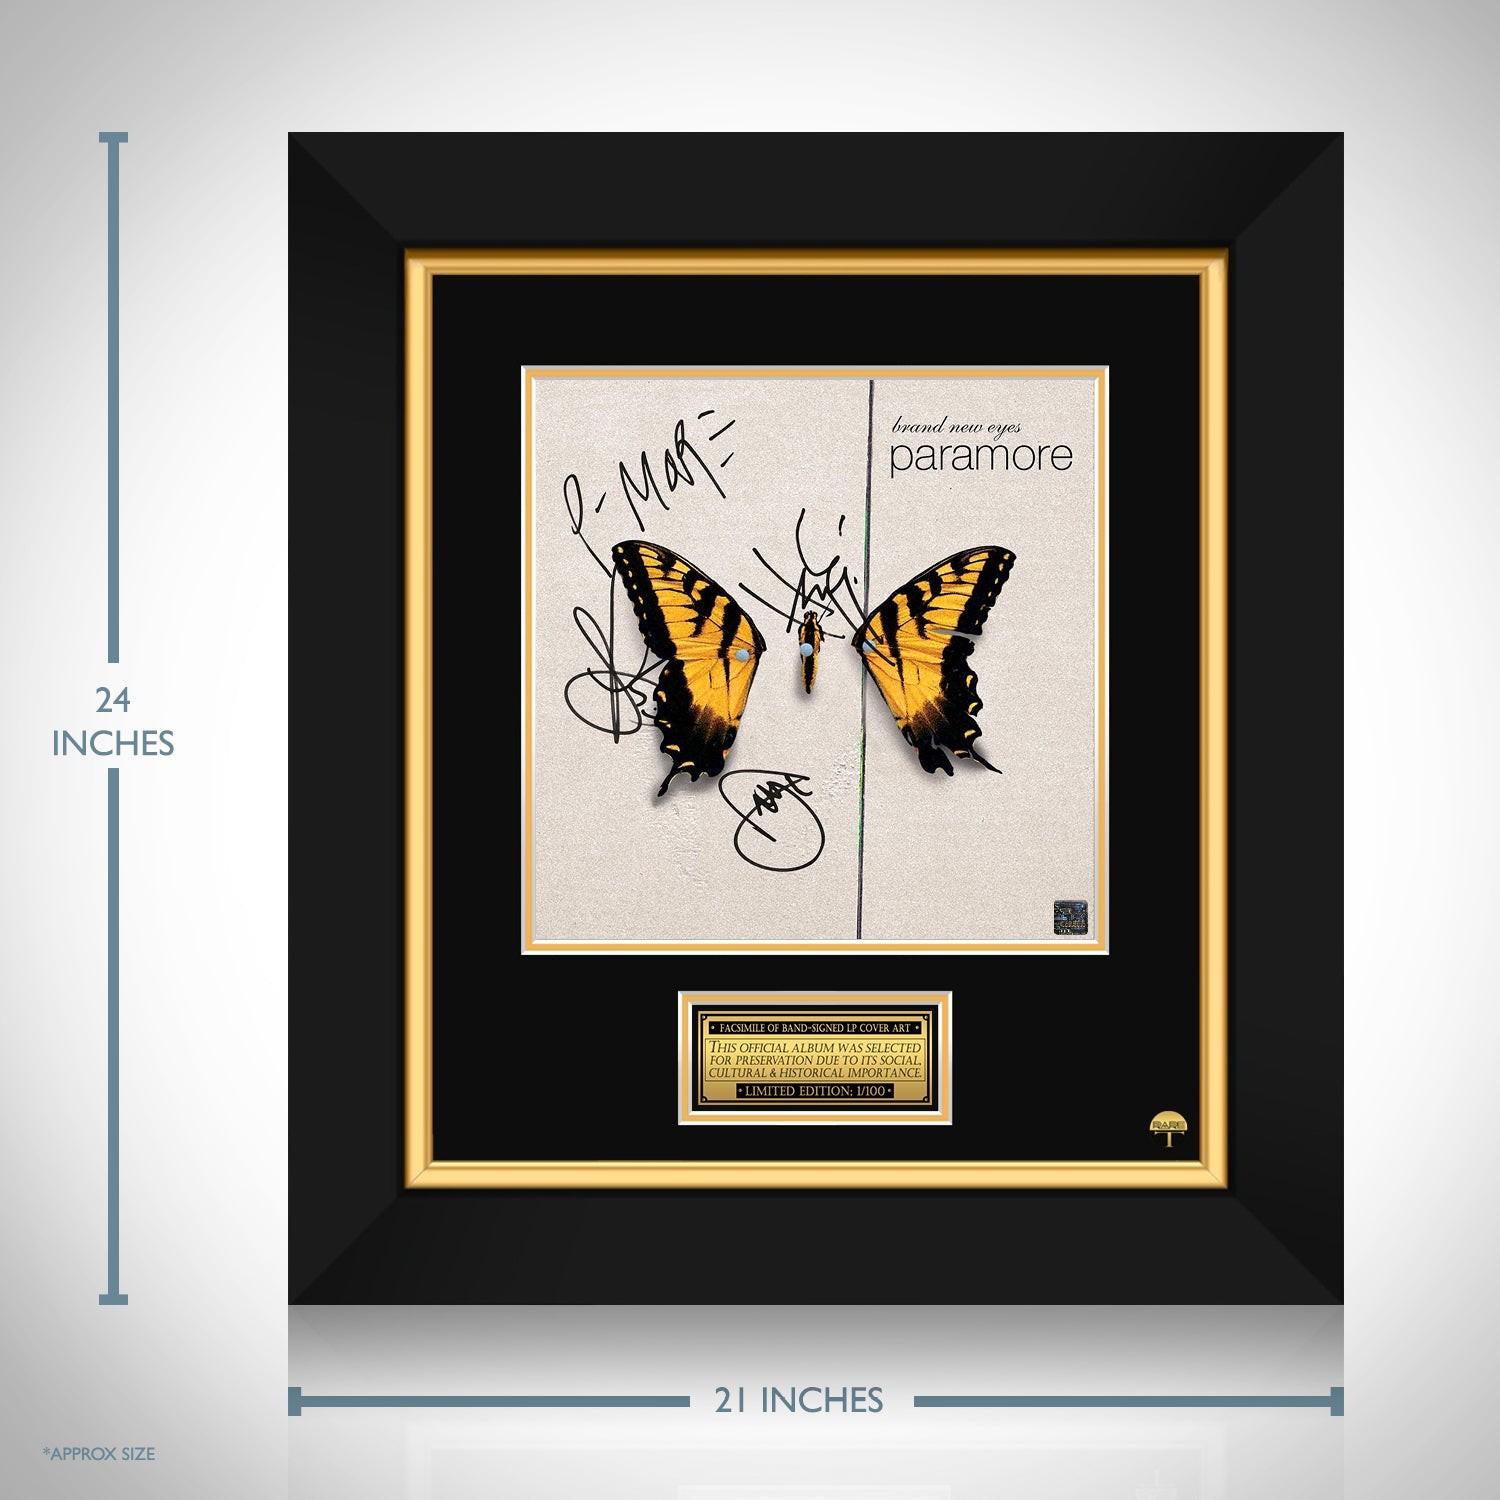 Paramore - Brand New Eyes, Colored Vinyl